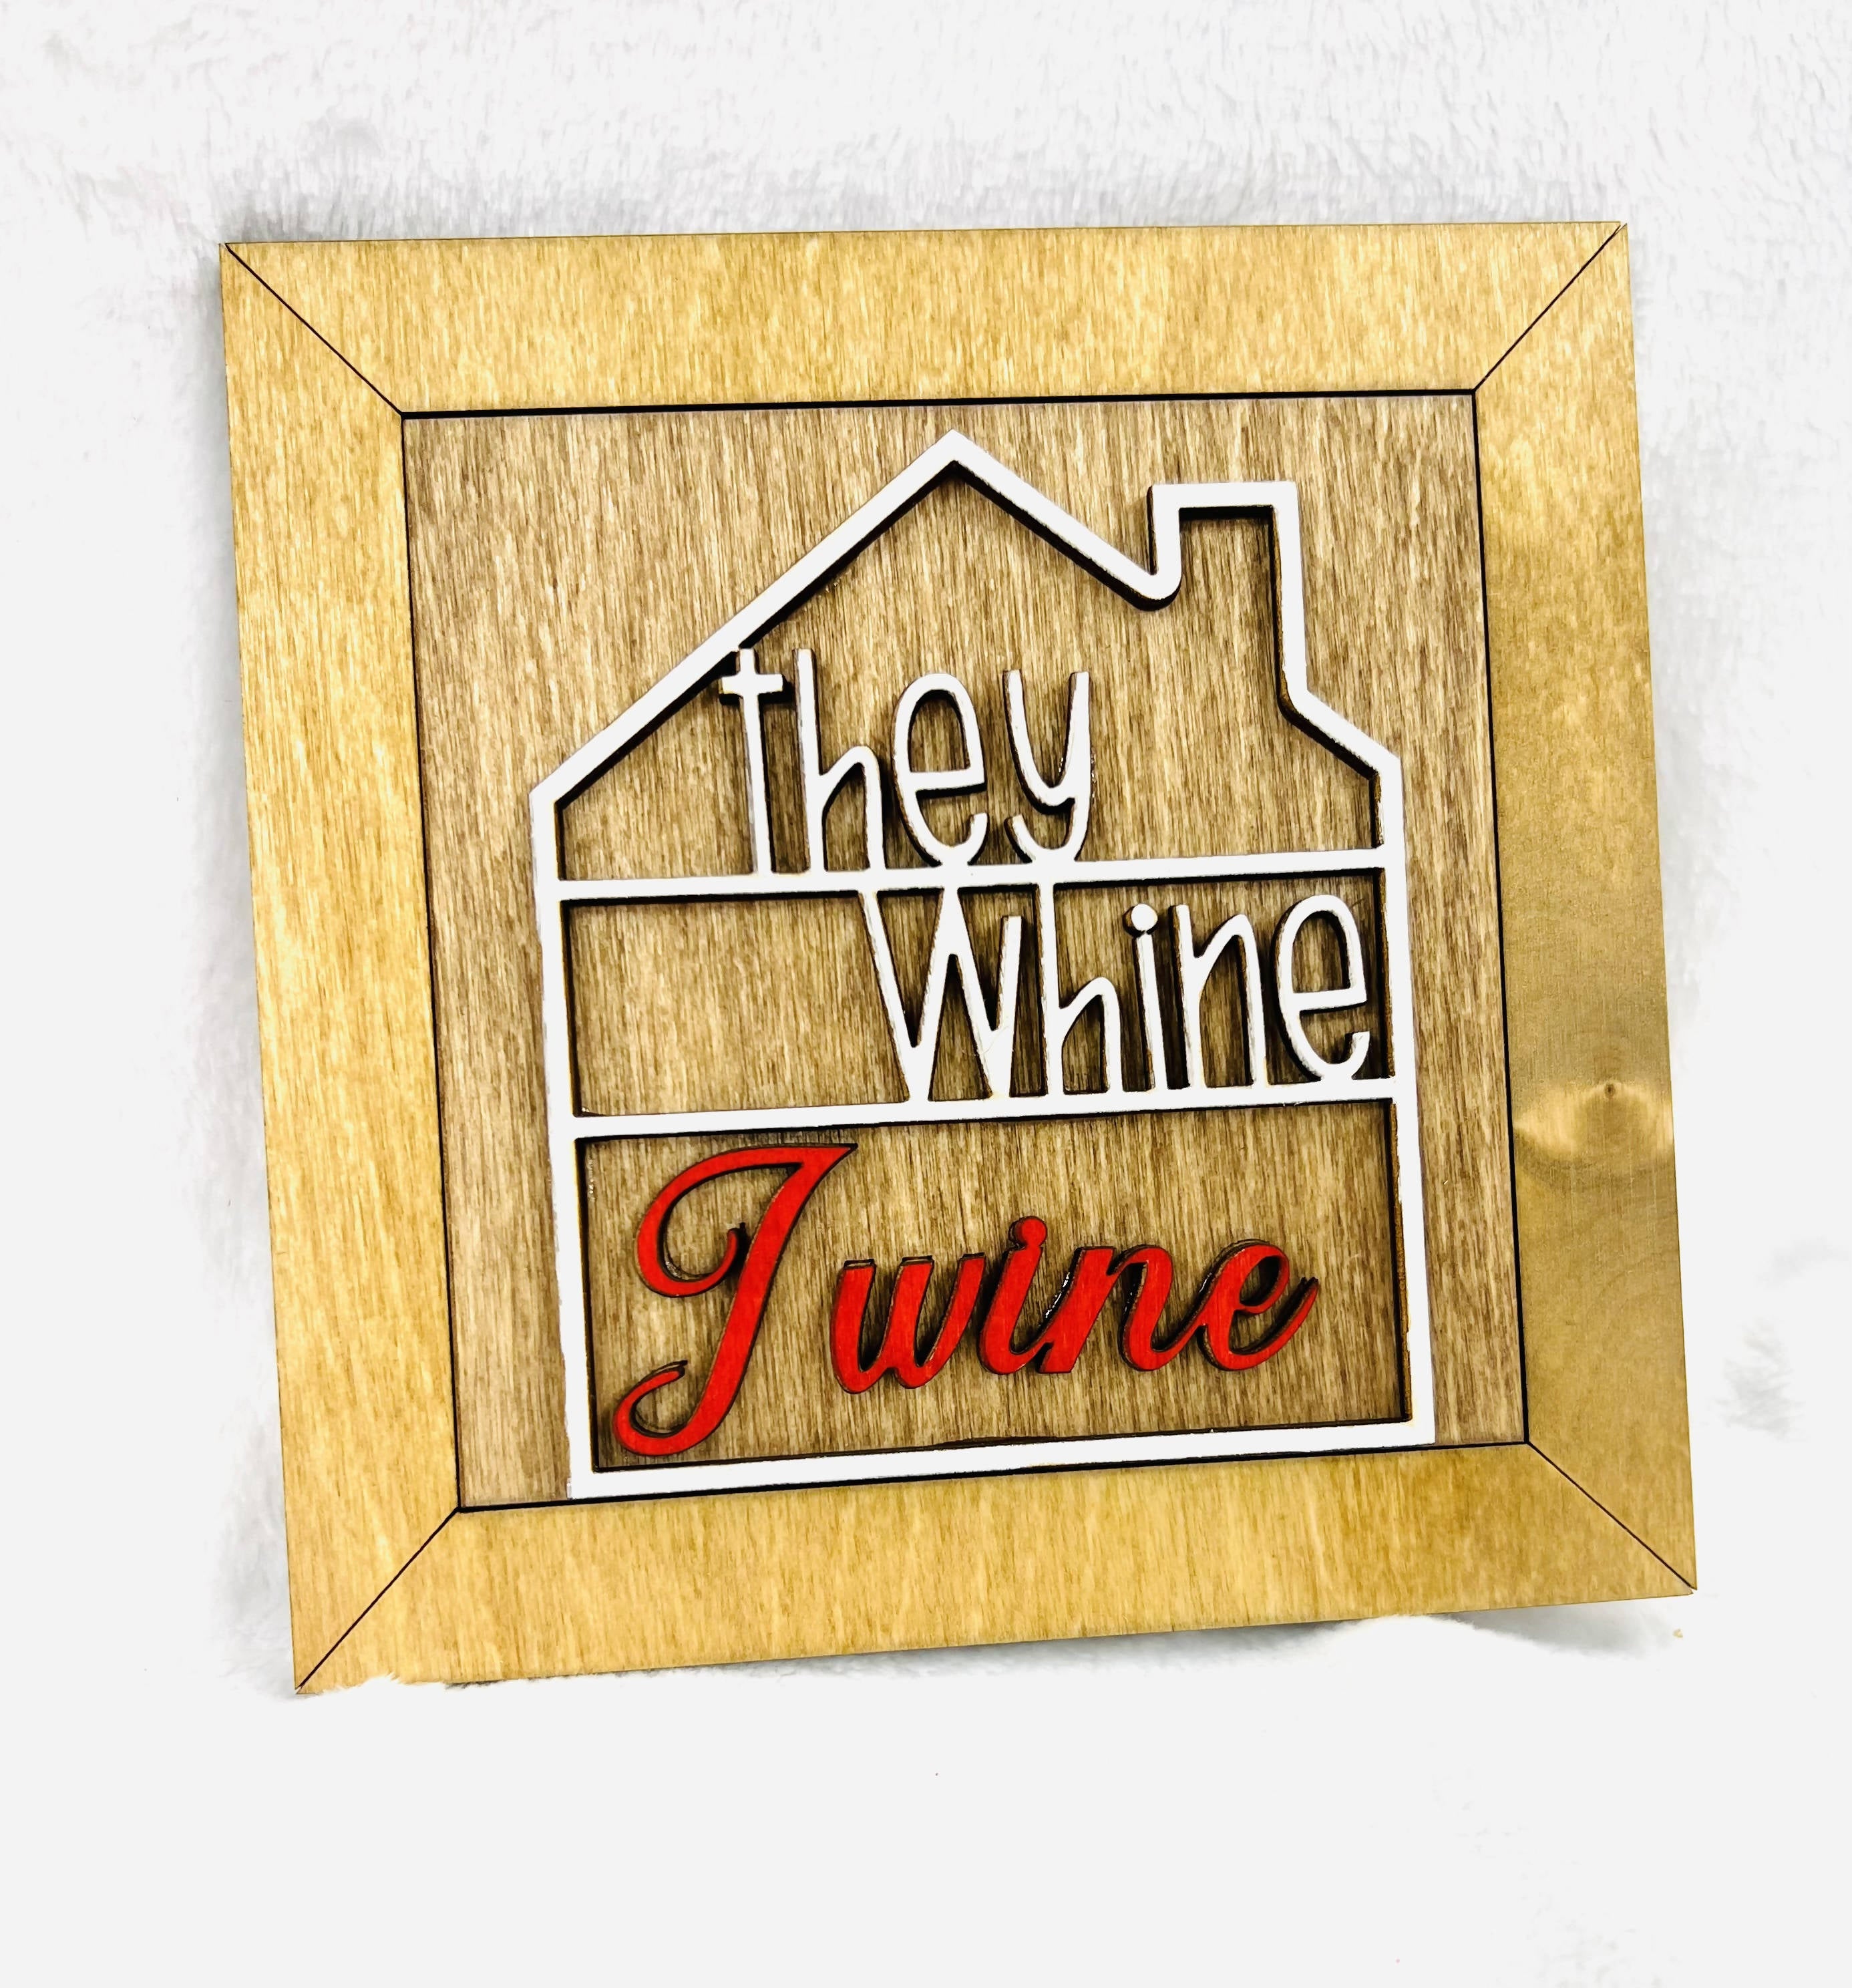 Square Insert (they whine square) VF19